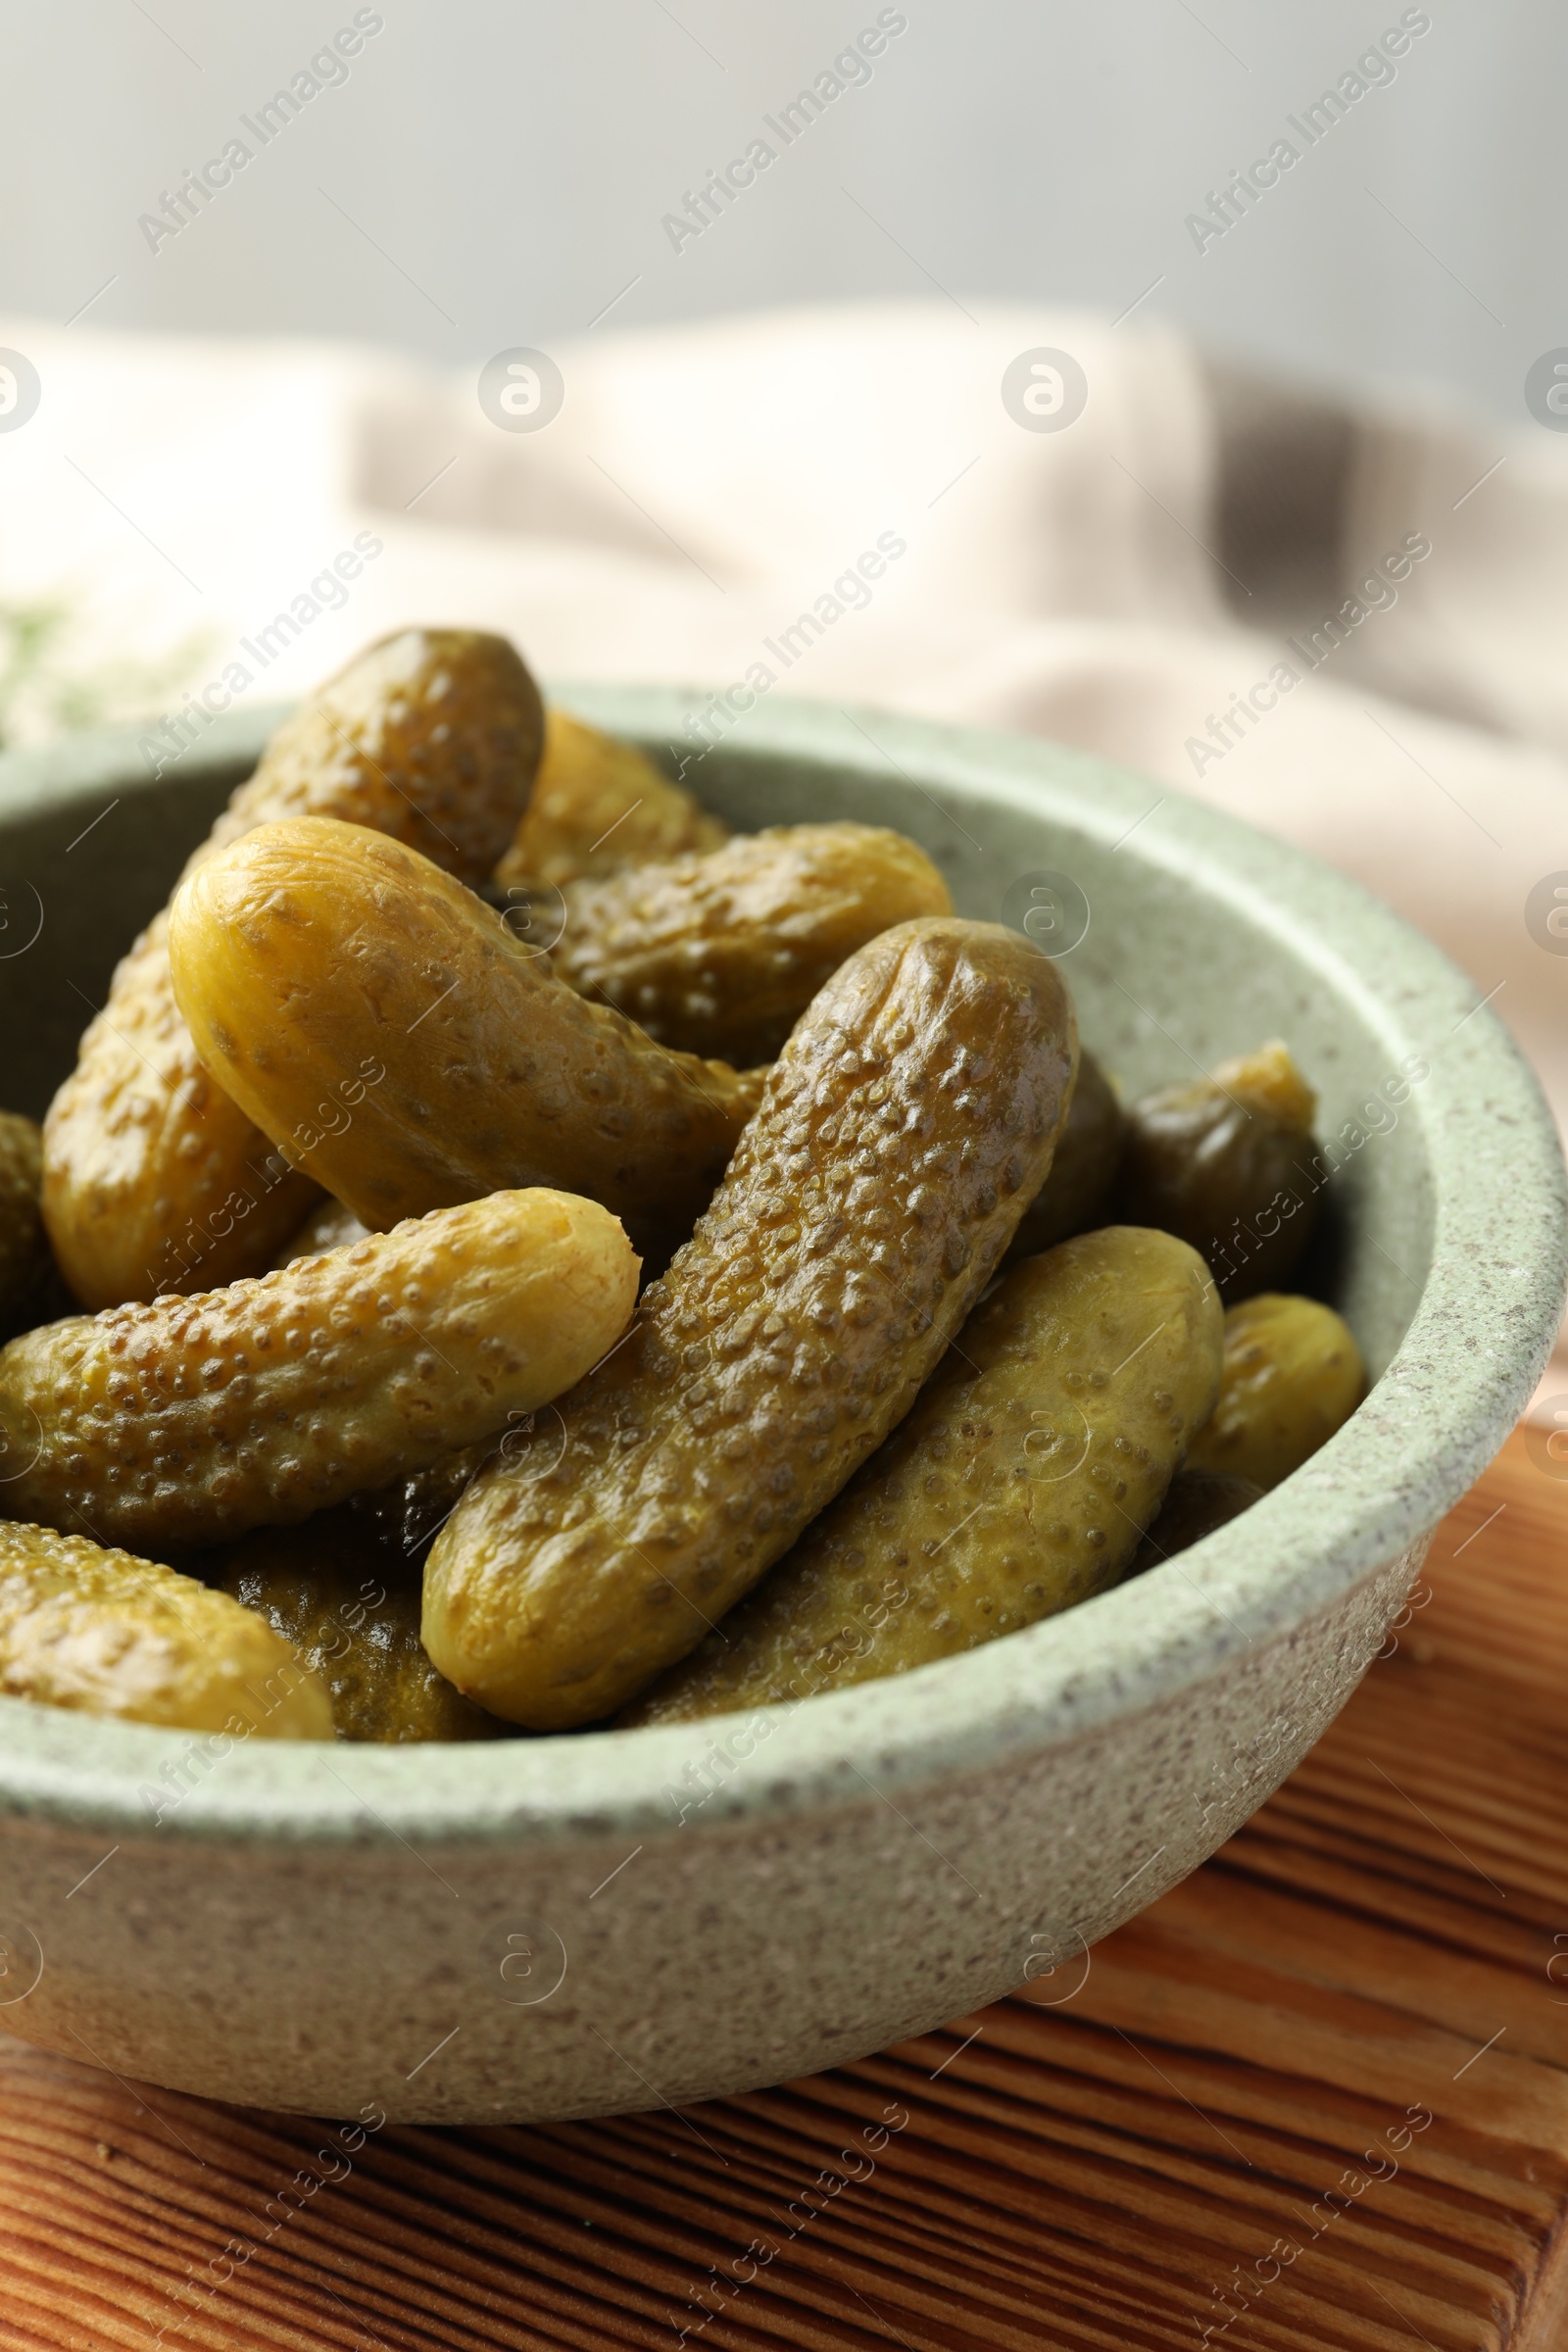 Photo of Pickled cucumbers in bowl on wooden board, closeup